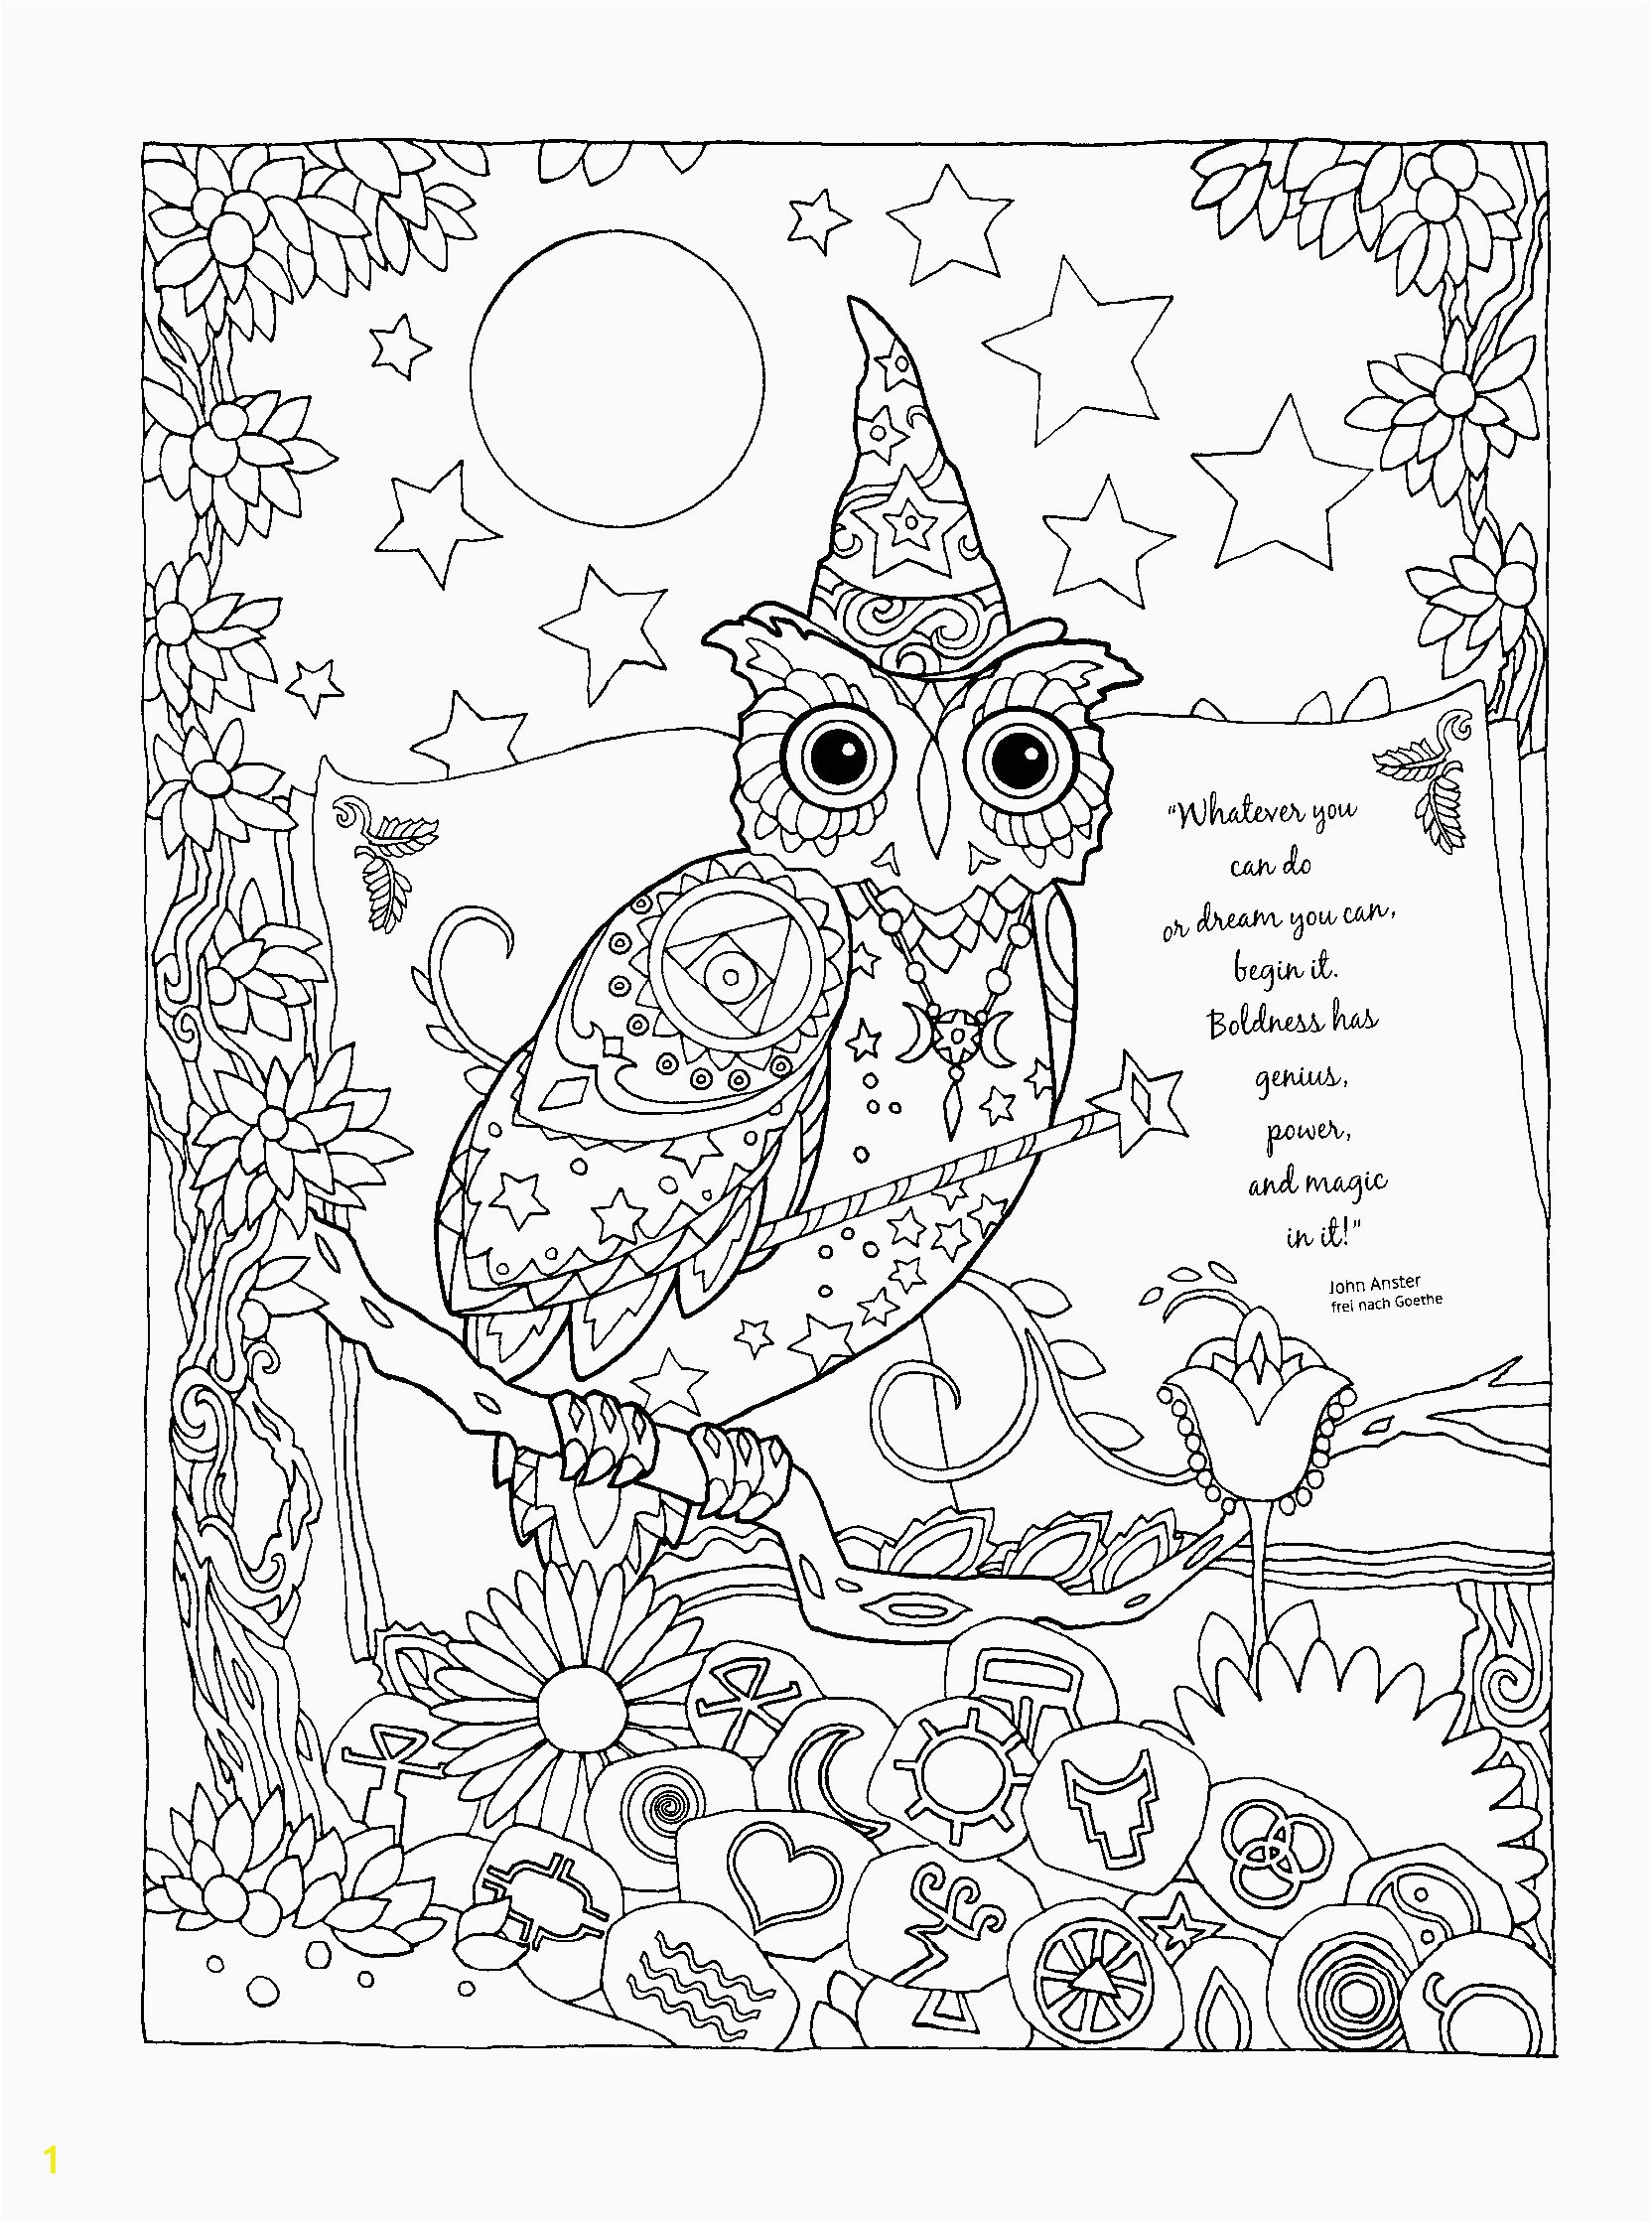 Conflict Resolution Coloring Pages Unique New Recipe Book Template Pages Free Image